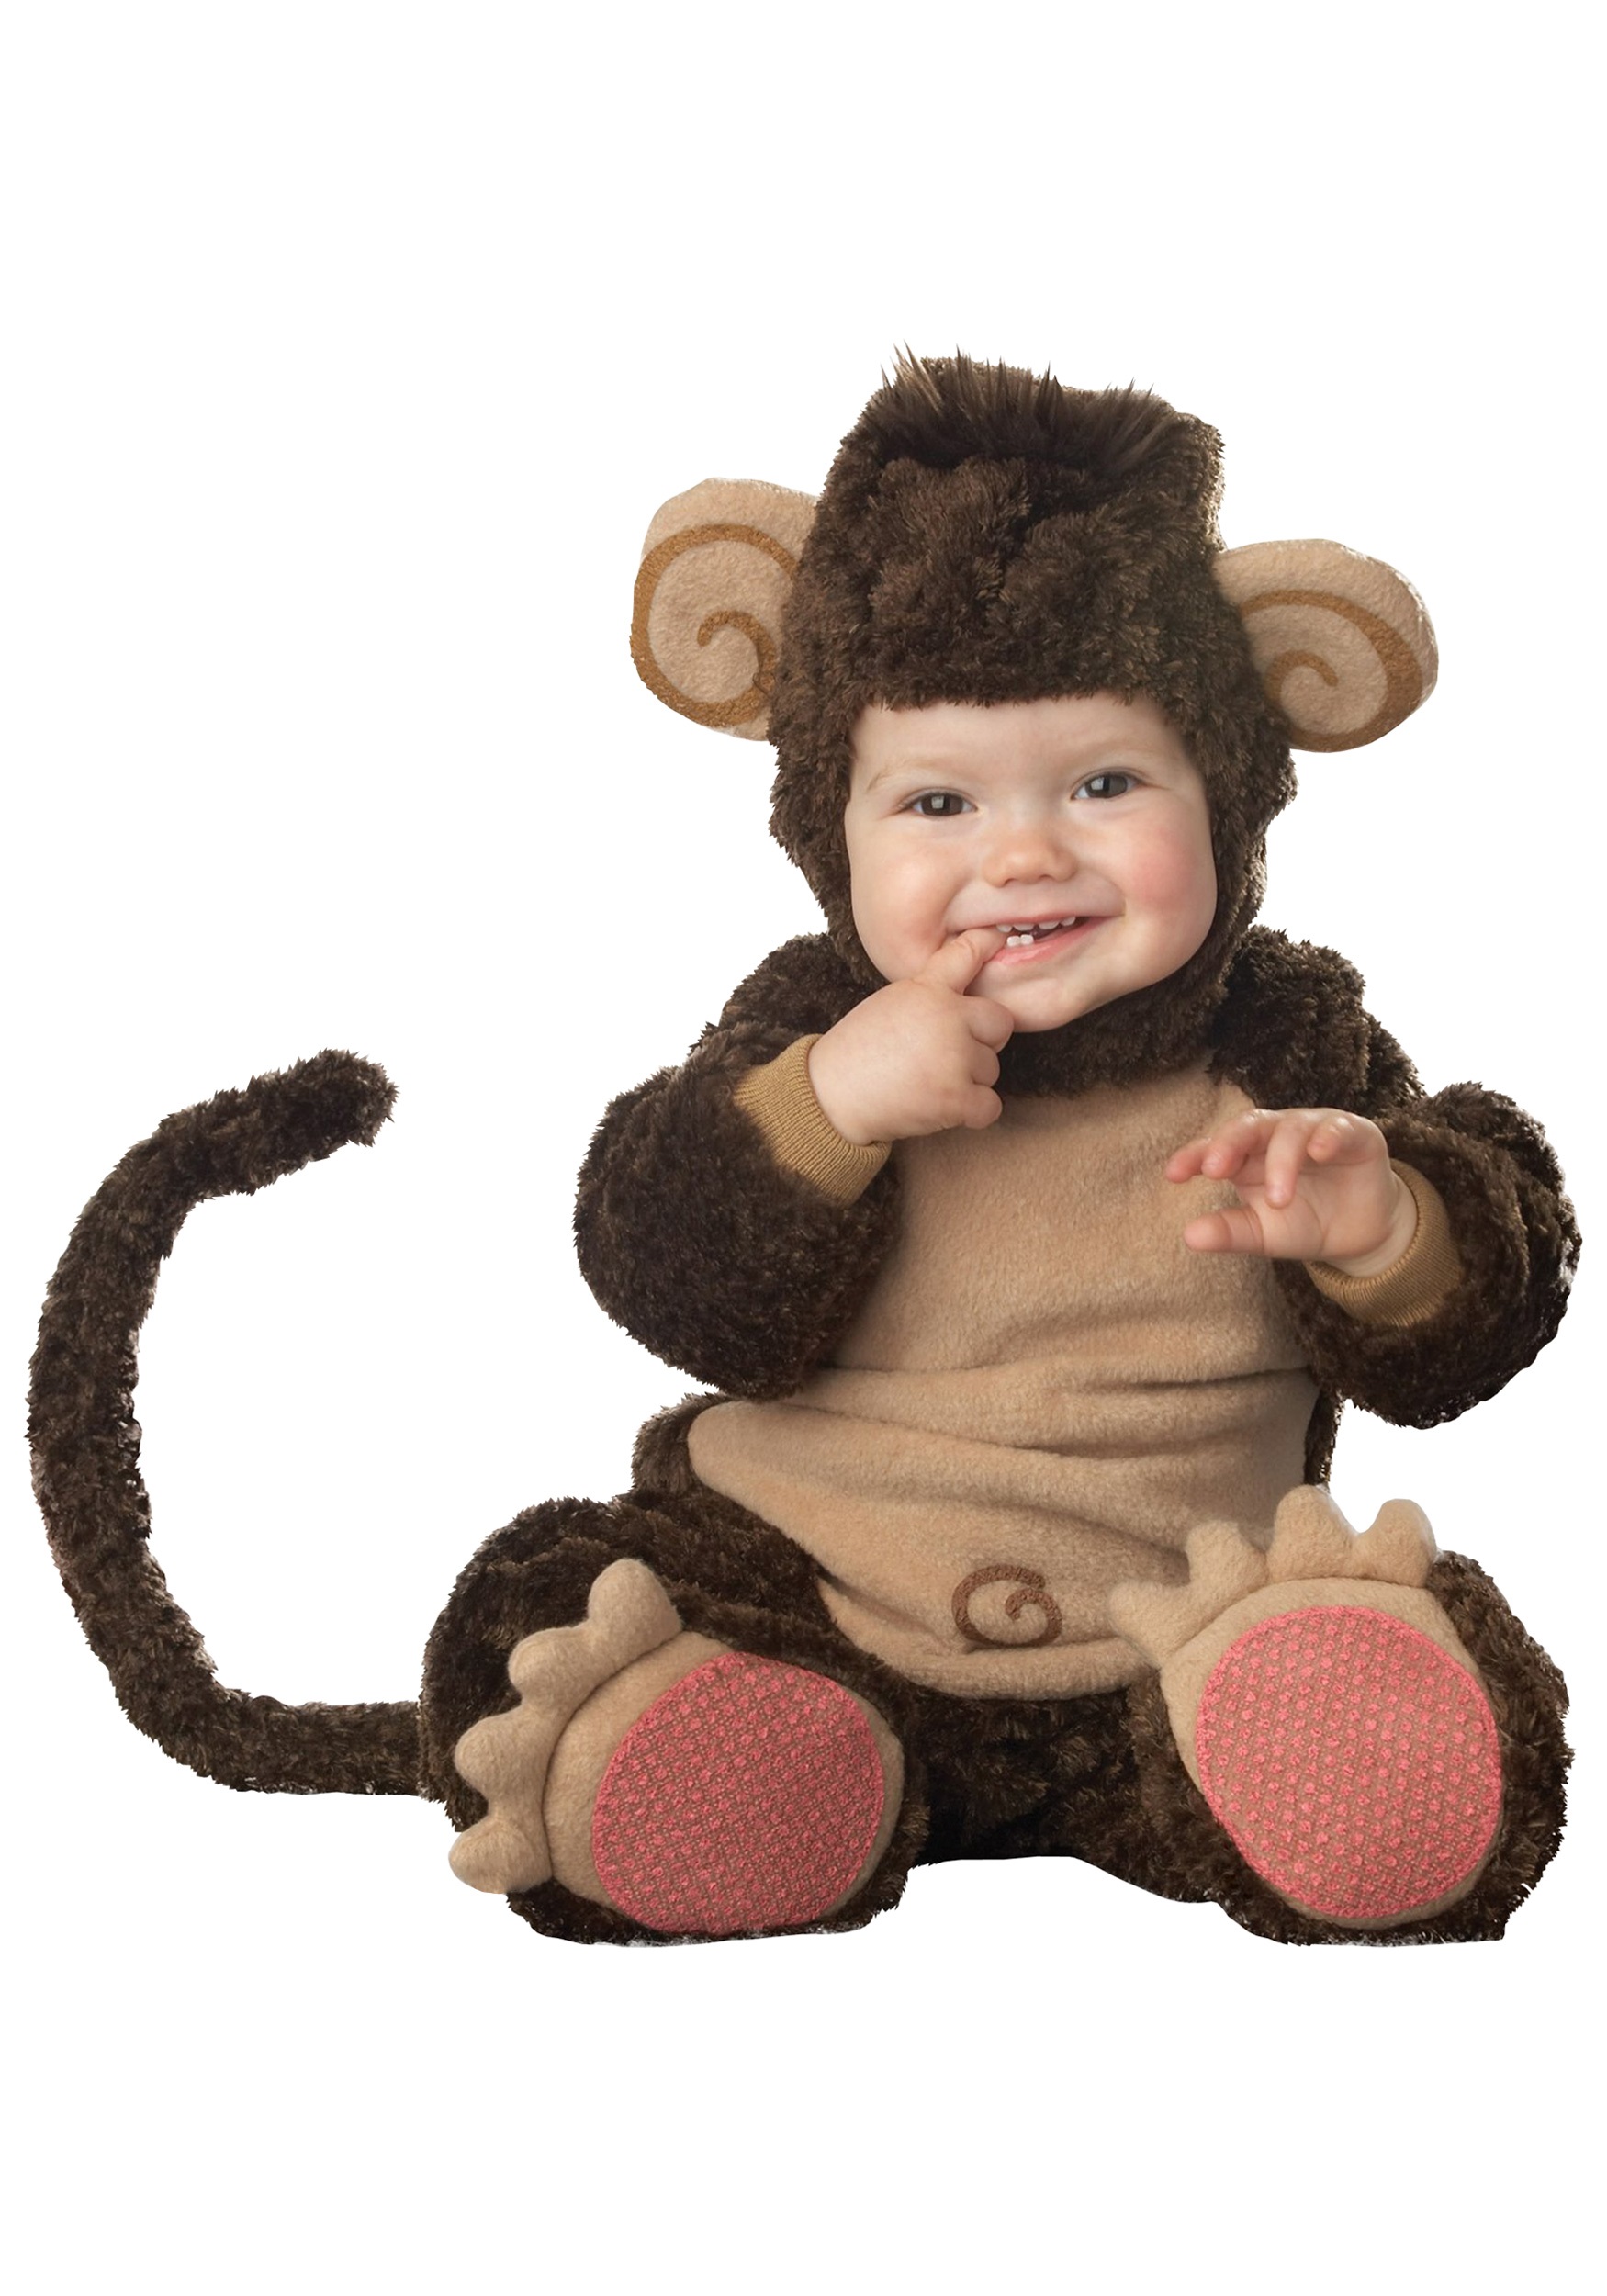 Lil Monkey Costume For Baby , Warm Halloween Costume For Toddlers